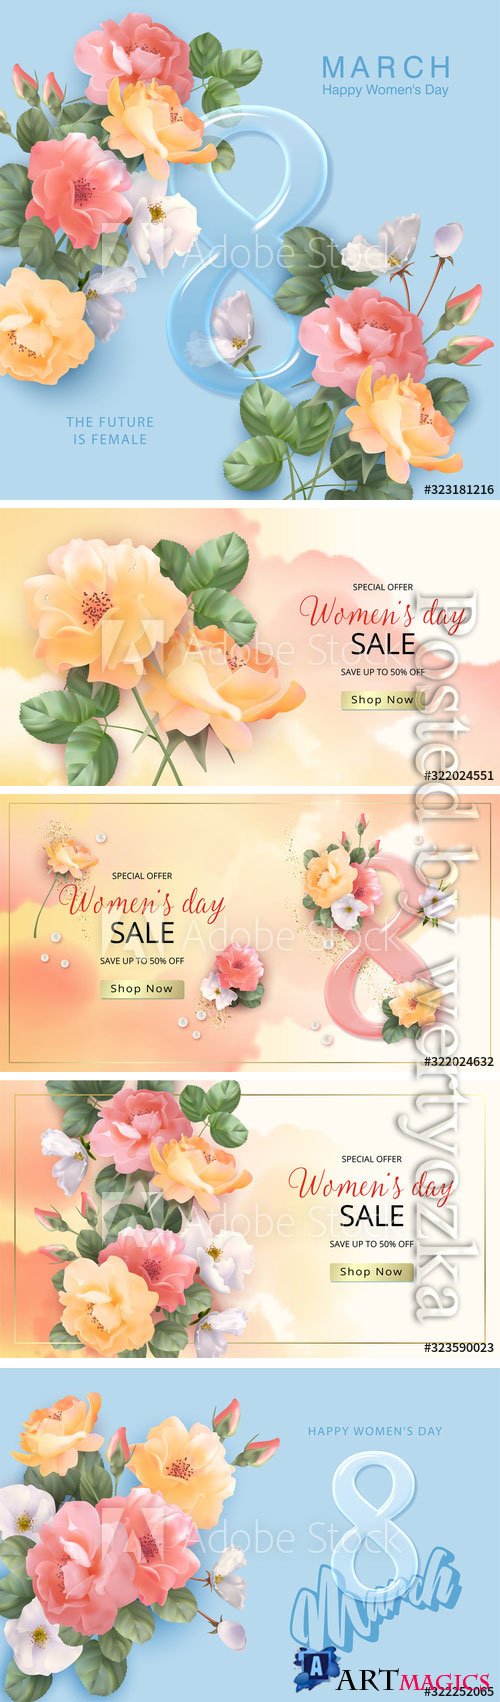 Vector banner March 8, floral background